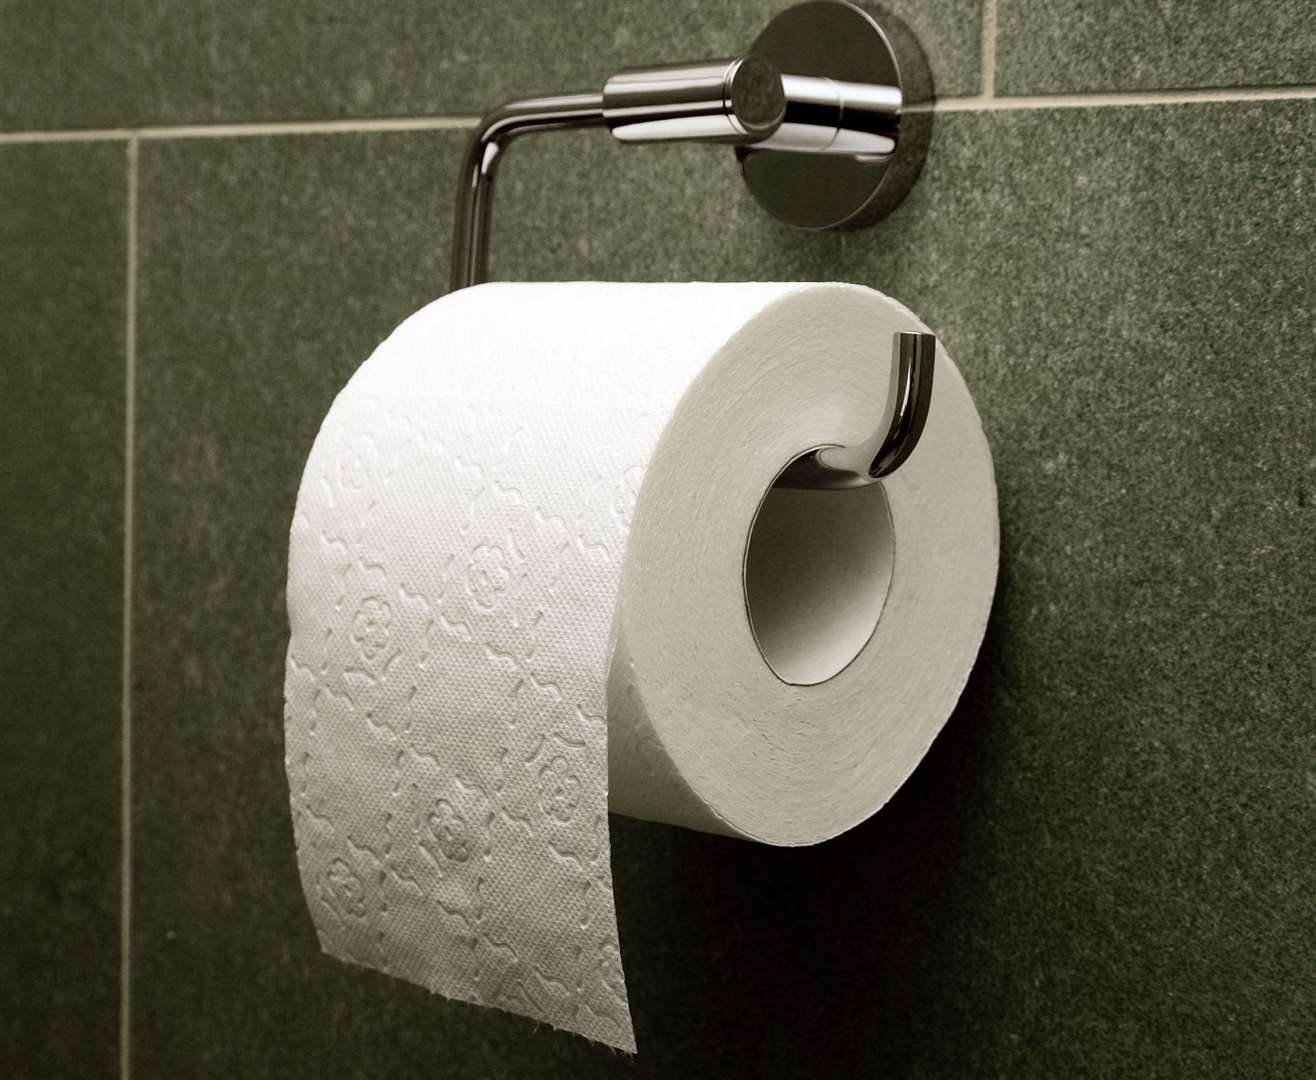 Brexit could lead to shortages of toilet roll